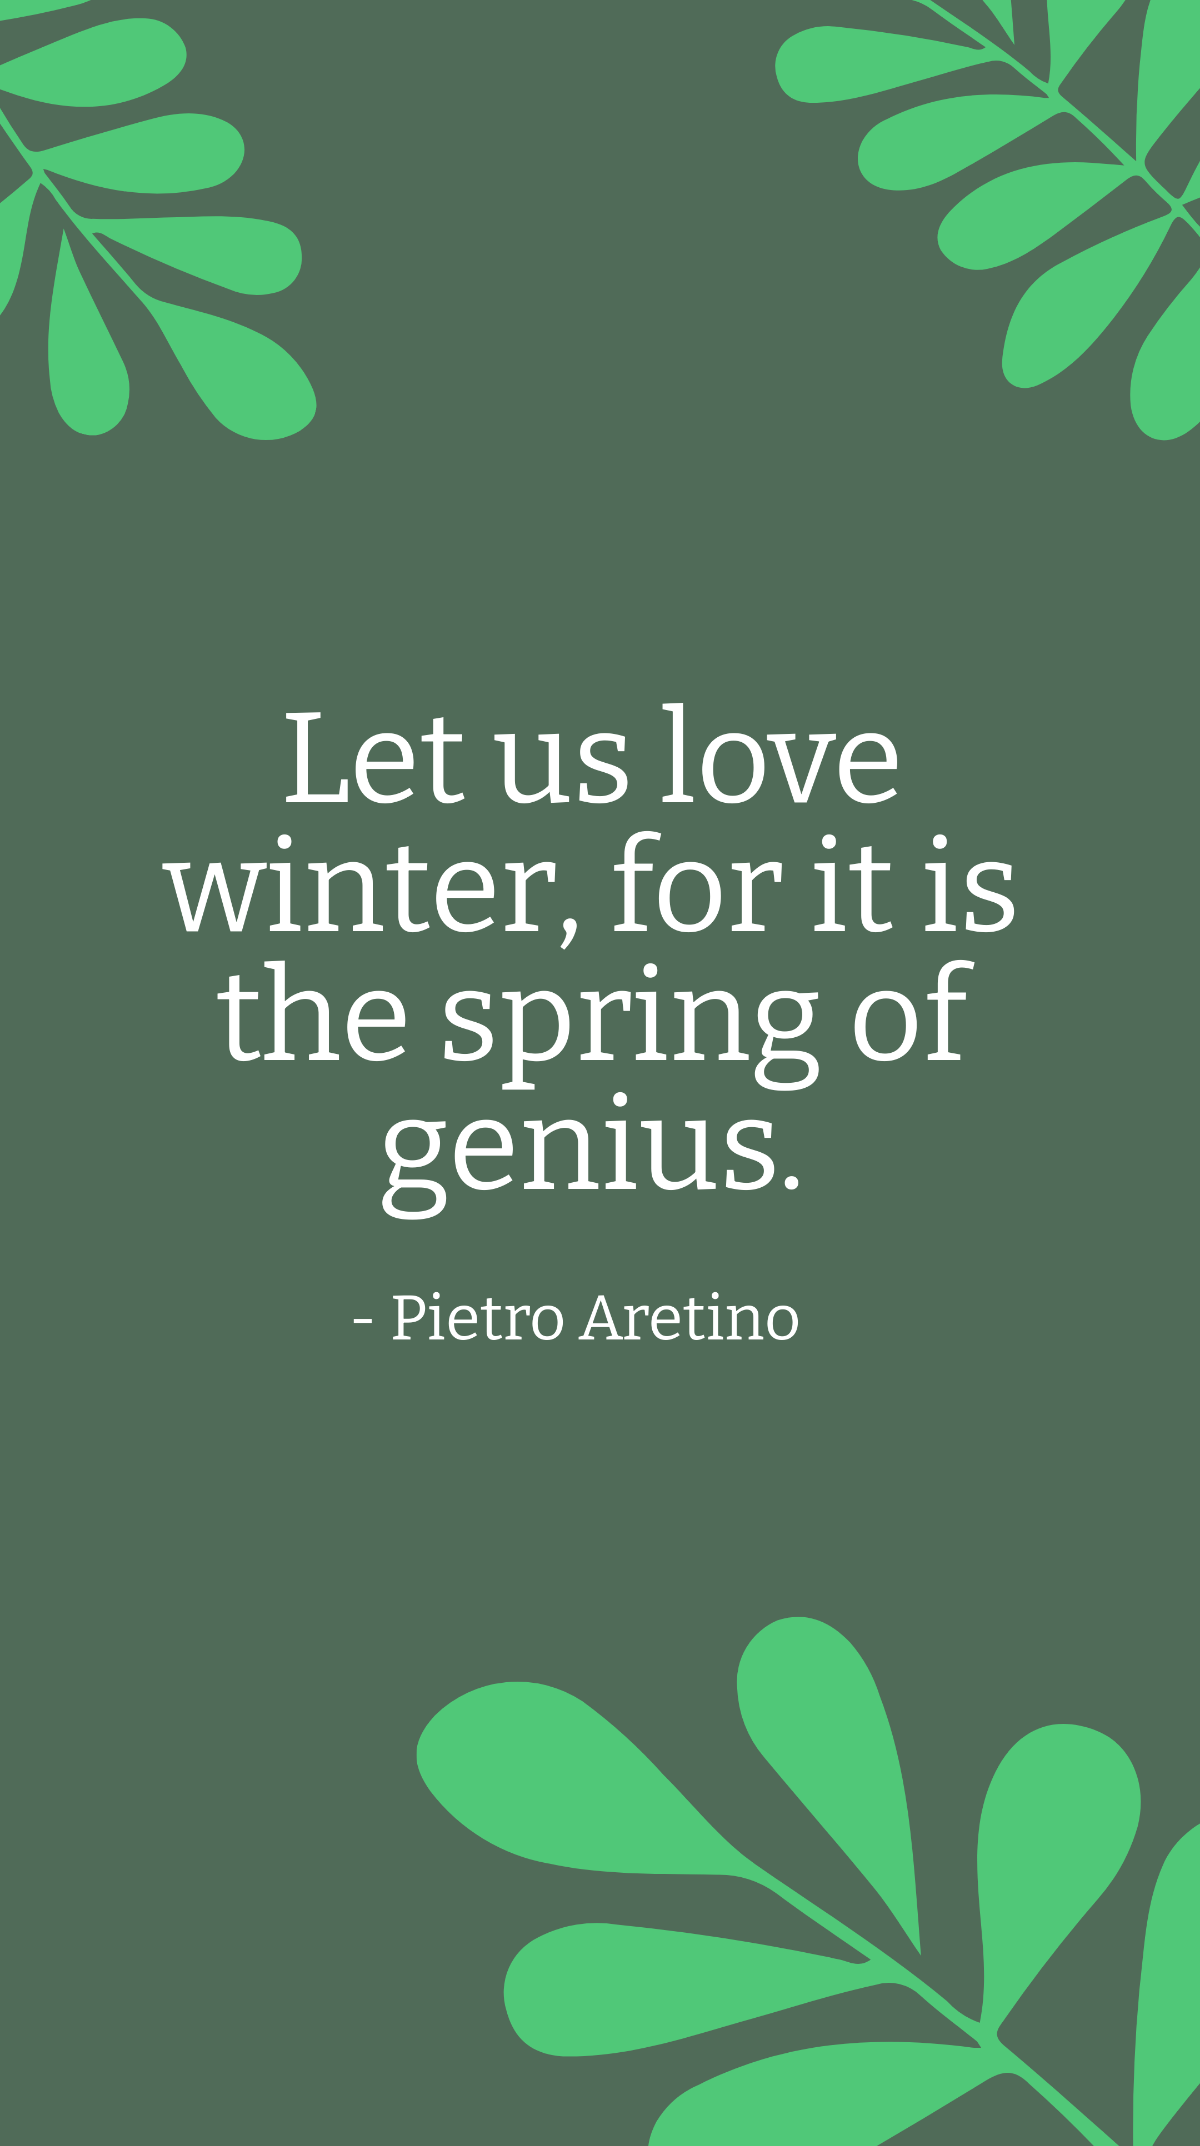 Free Pietro Aretino - Let us love winter, for it is the spring of genius. Template